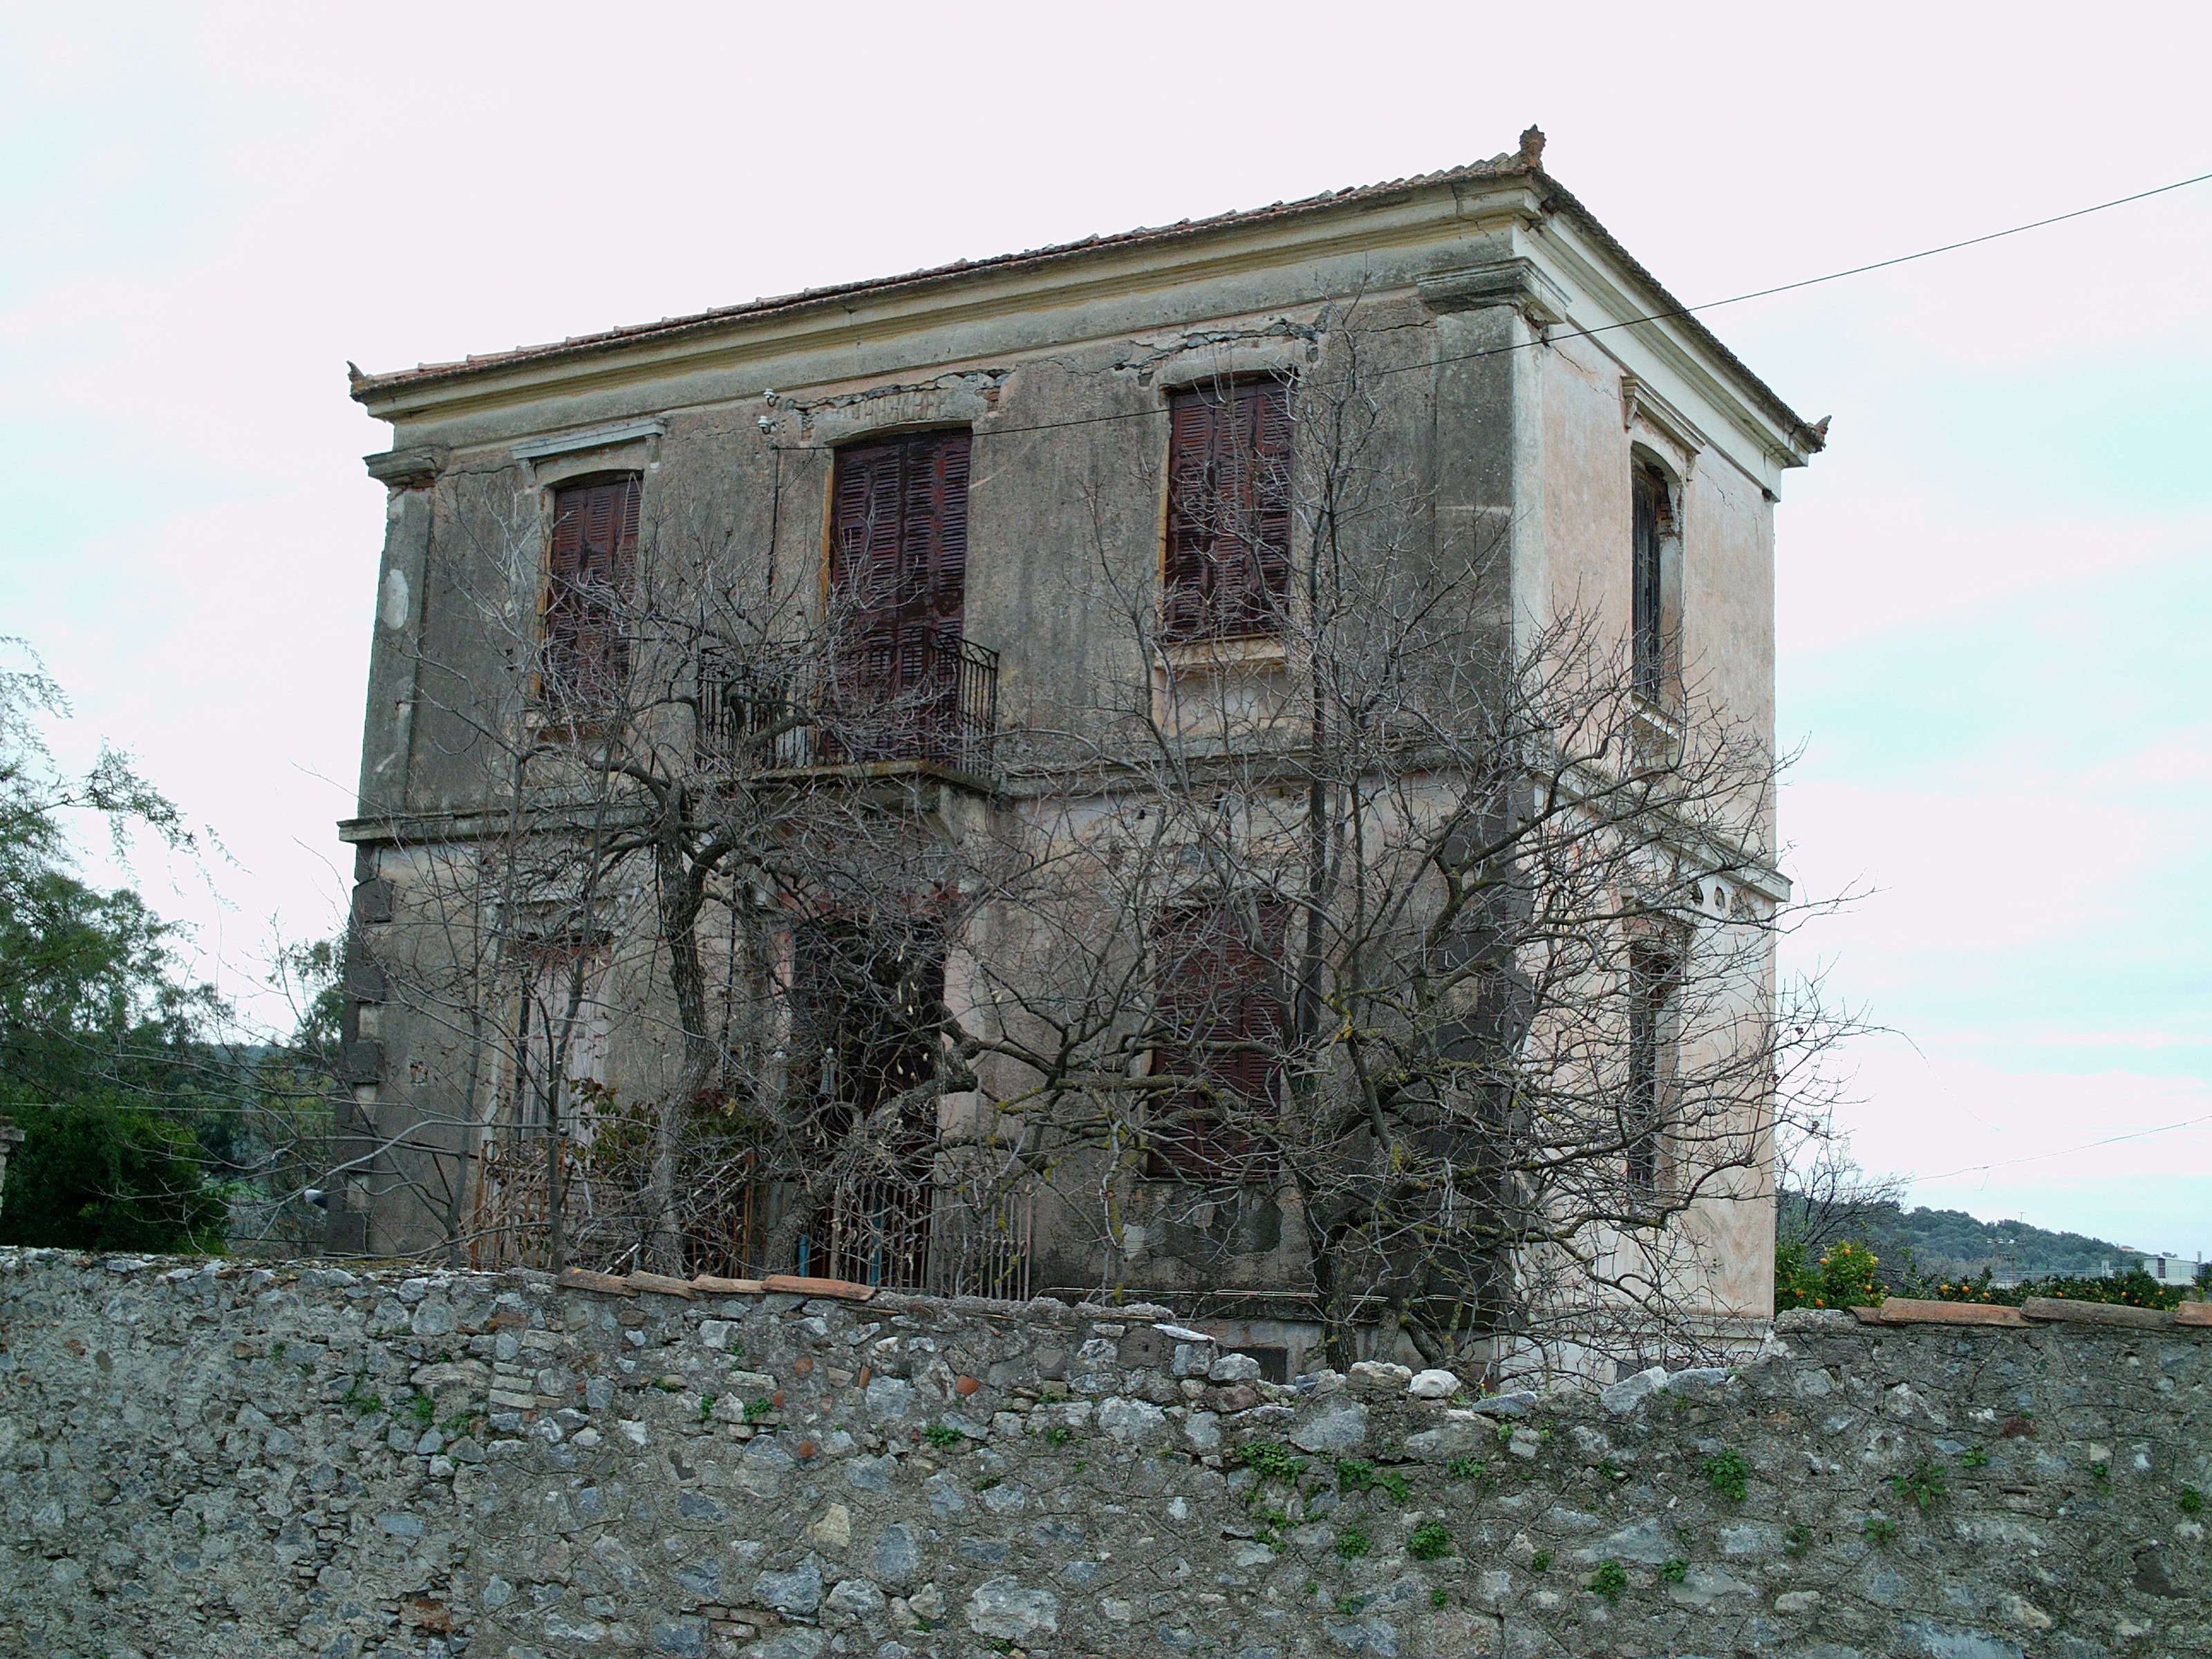 Lesvos old abandoned house Photo from Achlia in Lesvos | Greece.com